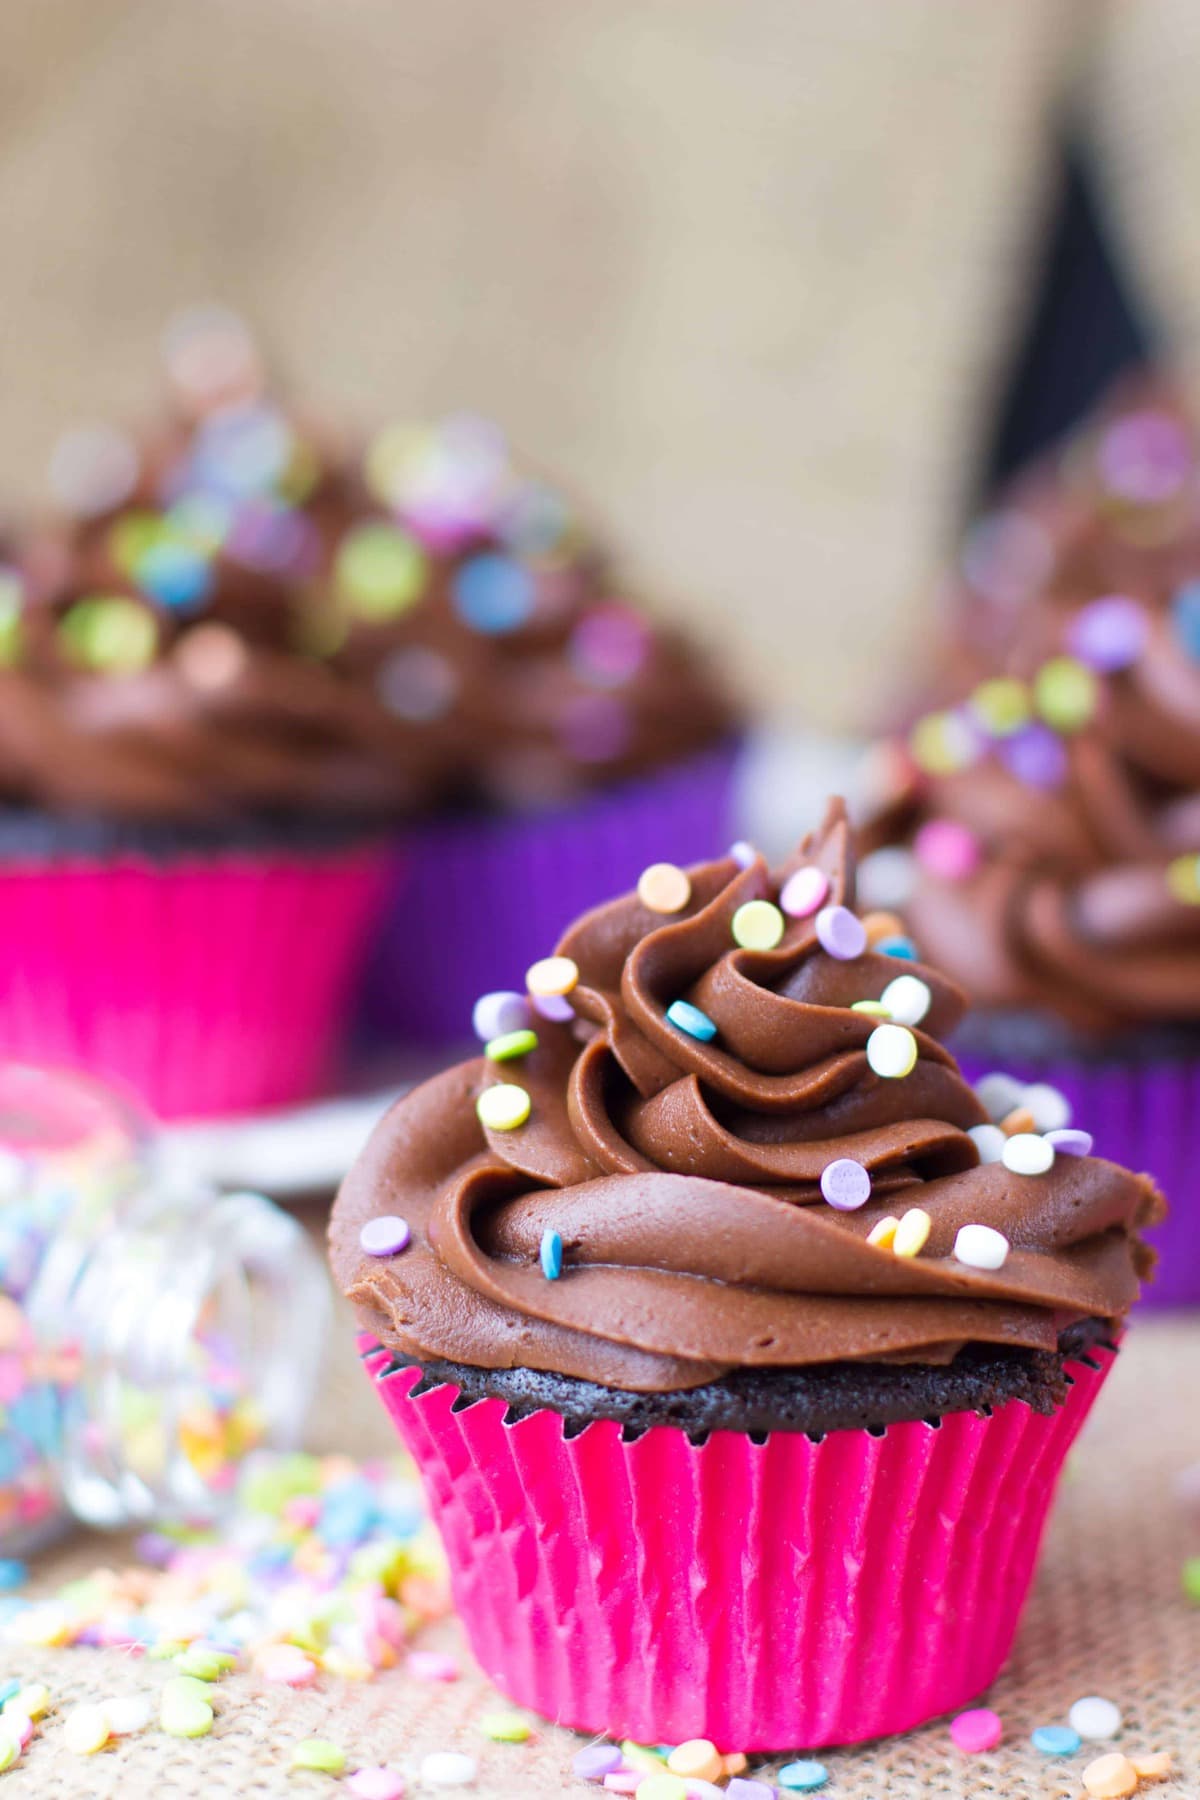 Chocolate cupcake with chocolate frosting, topped with sprinkles